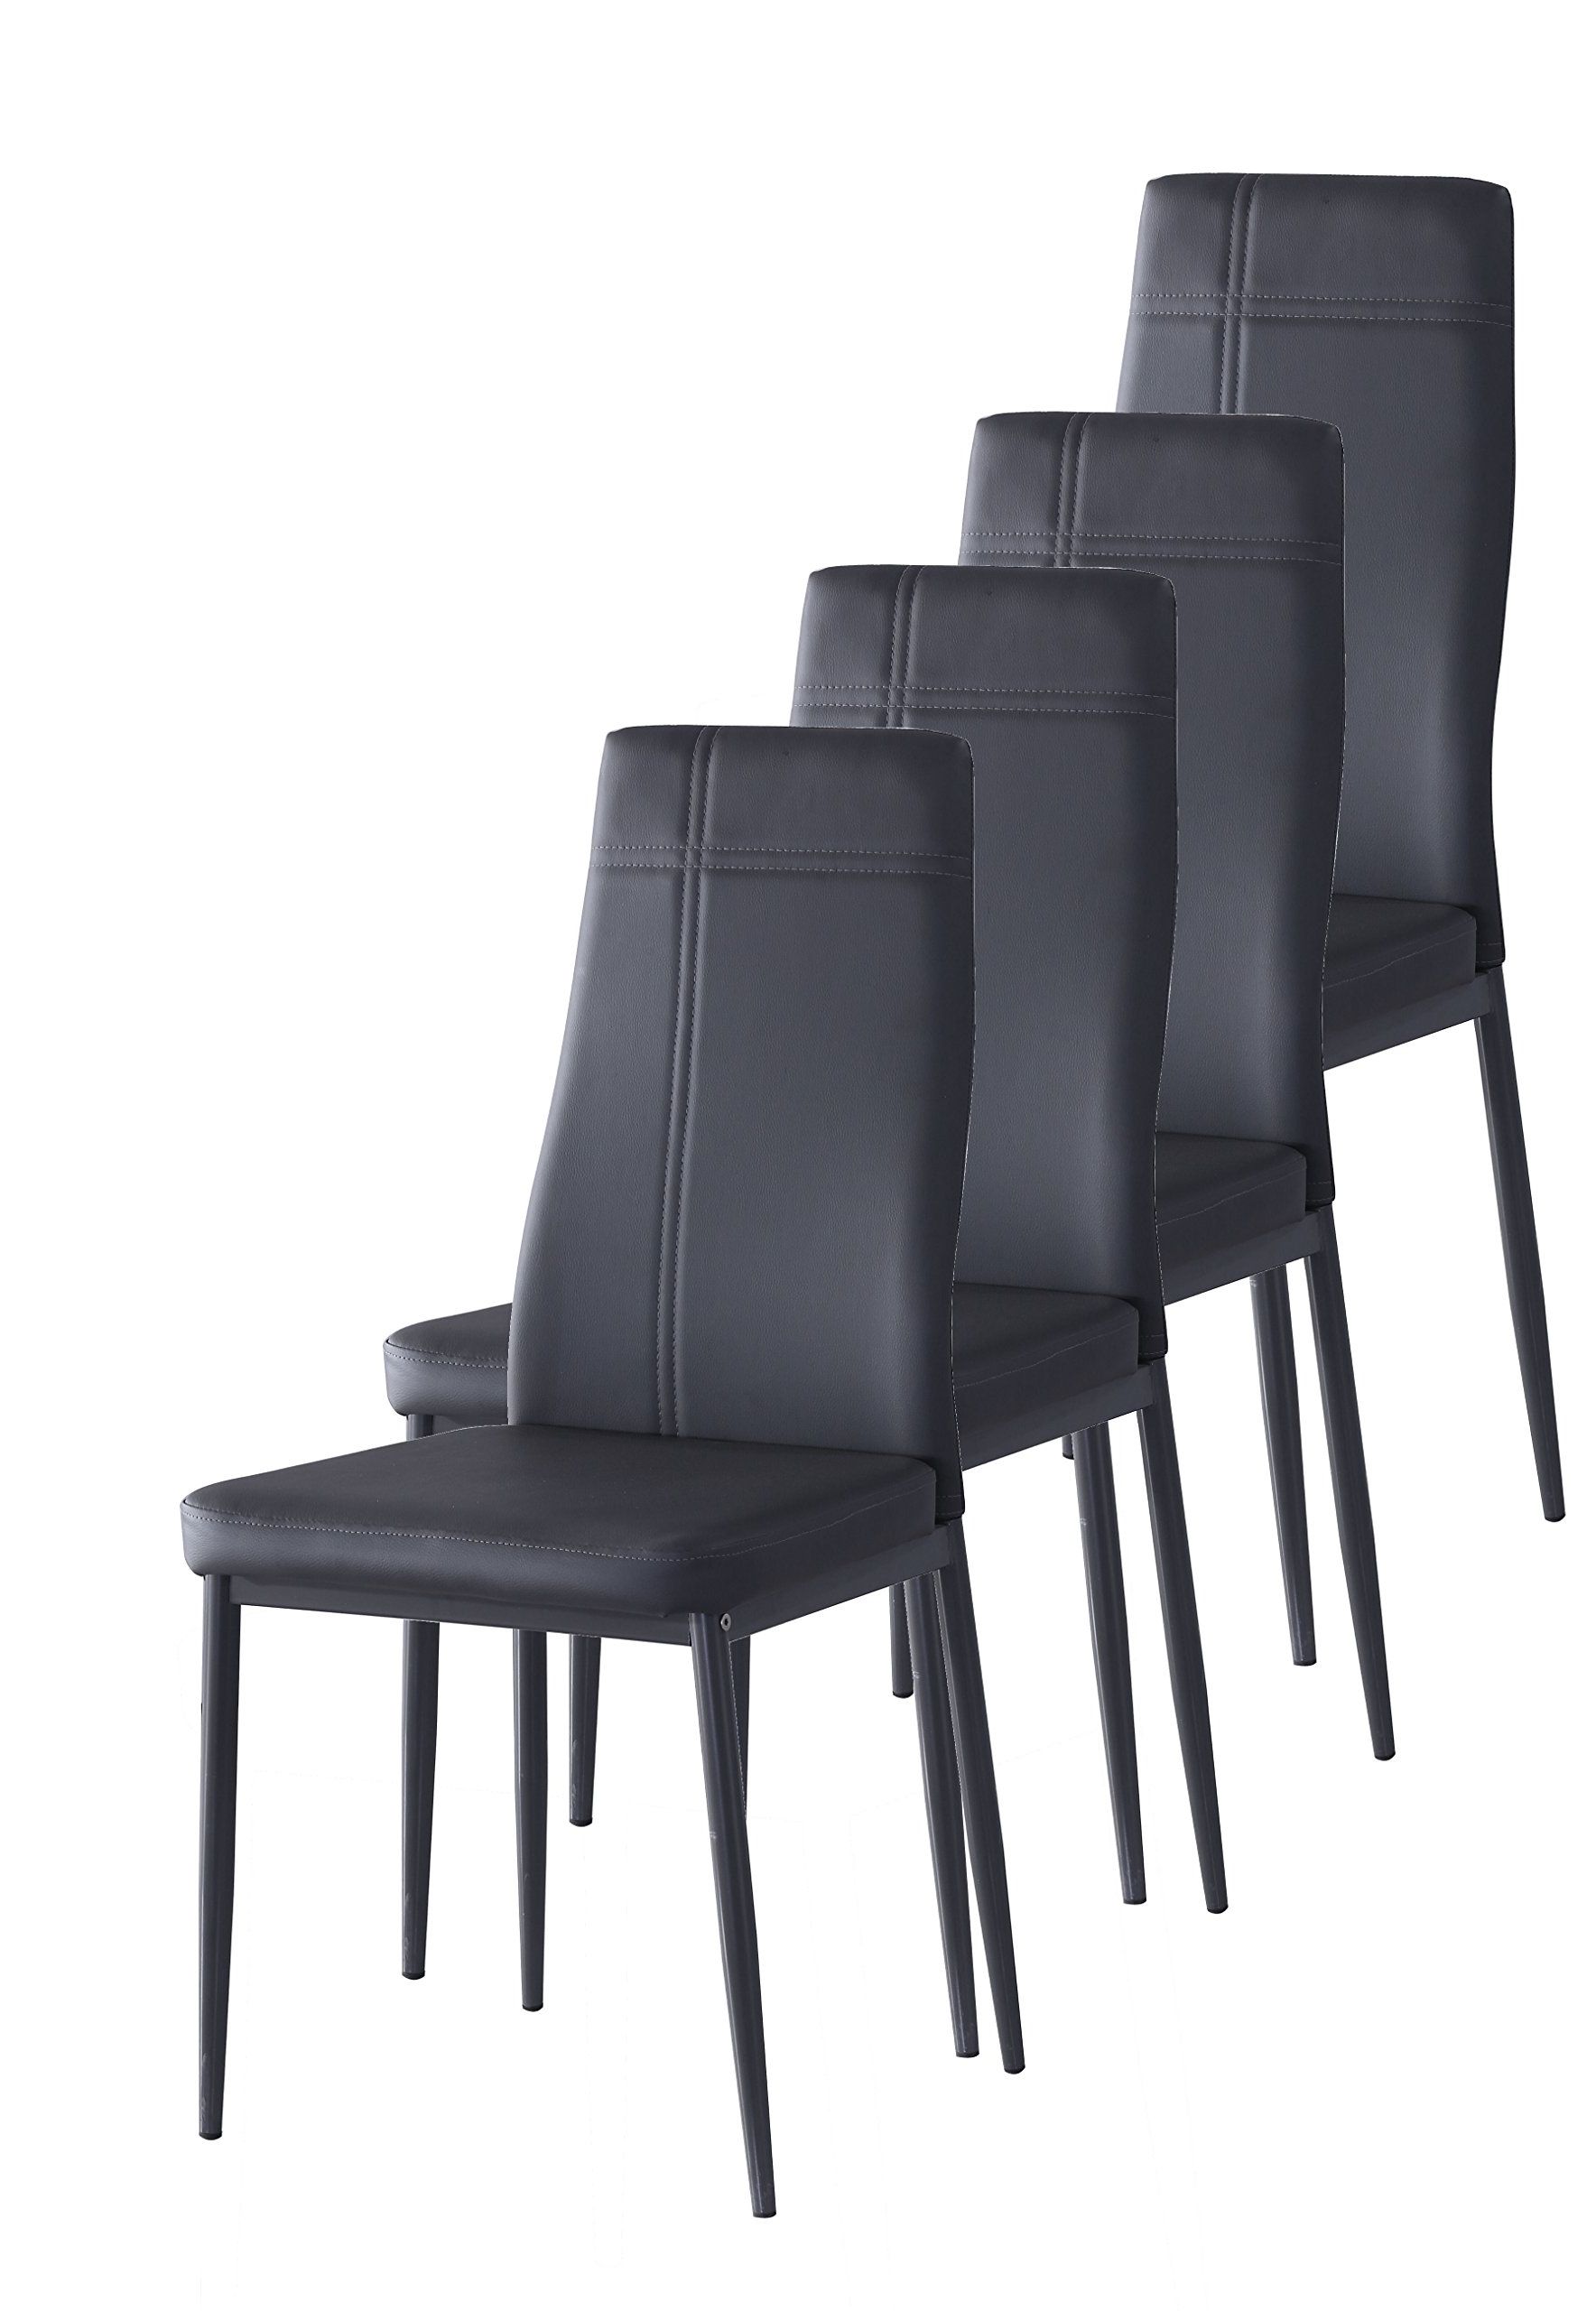 Alexa Grey Side Chairs Within Recent Amazon – Kings Brand Gray Metal Frame Dining Side Chair (grey (View 7 of 20)